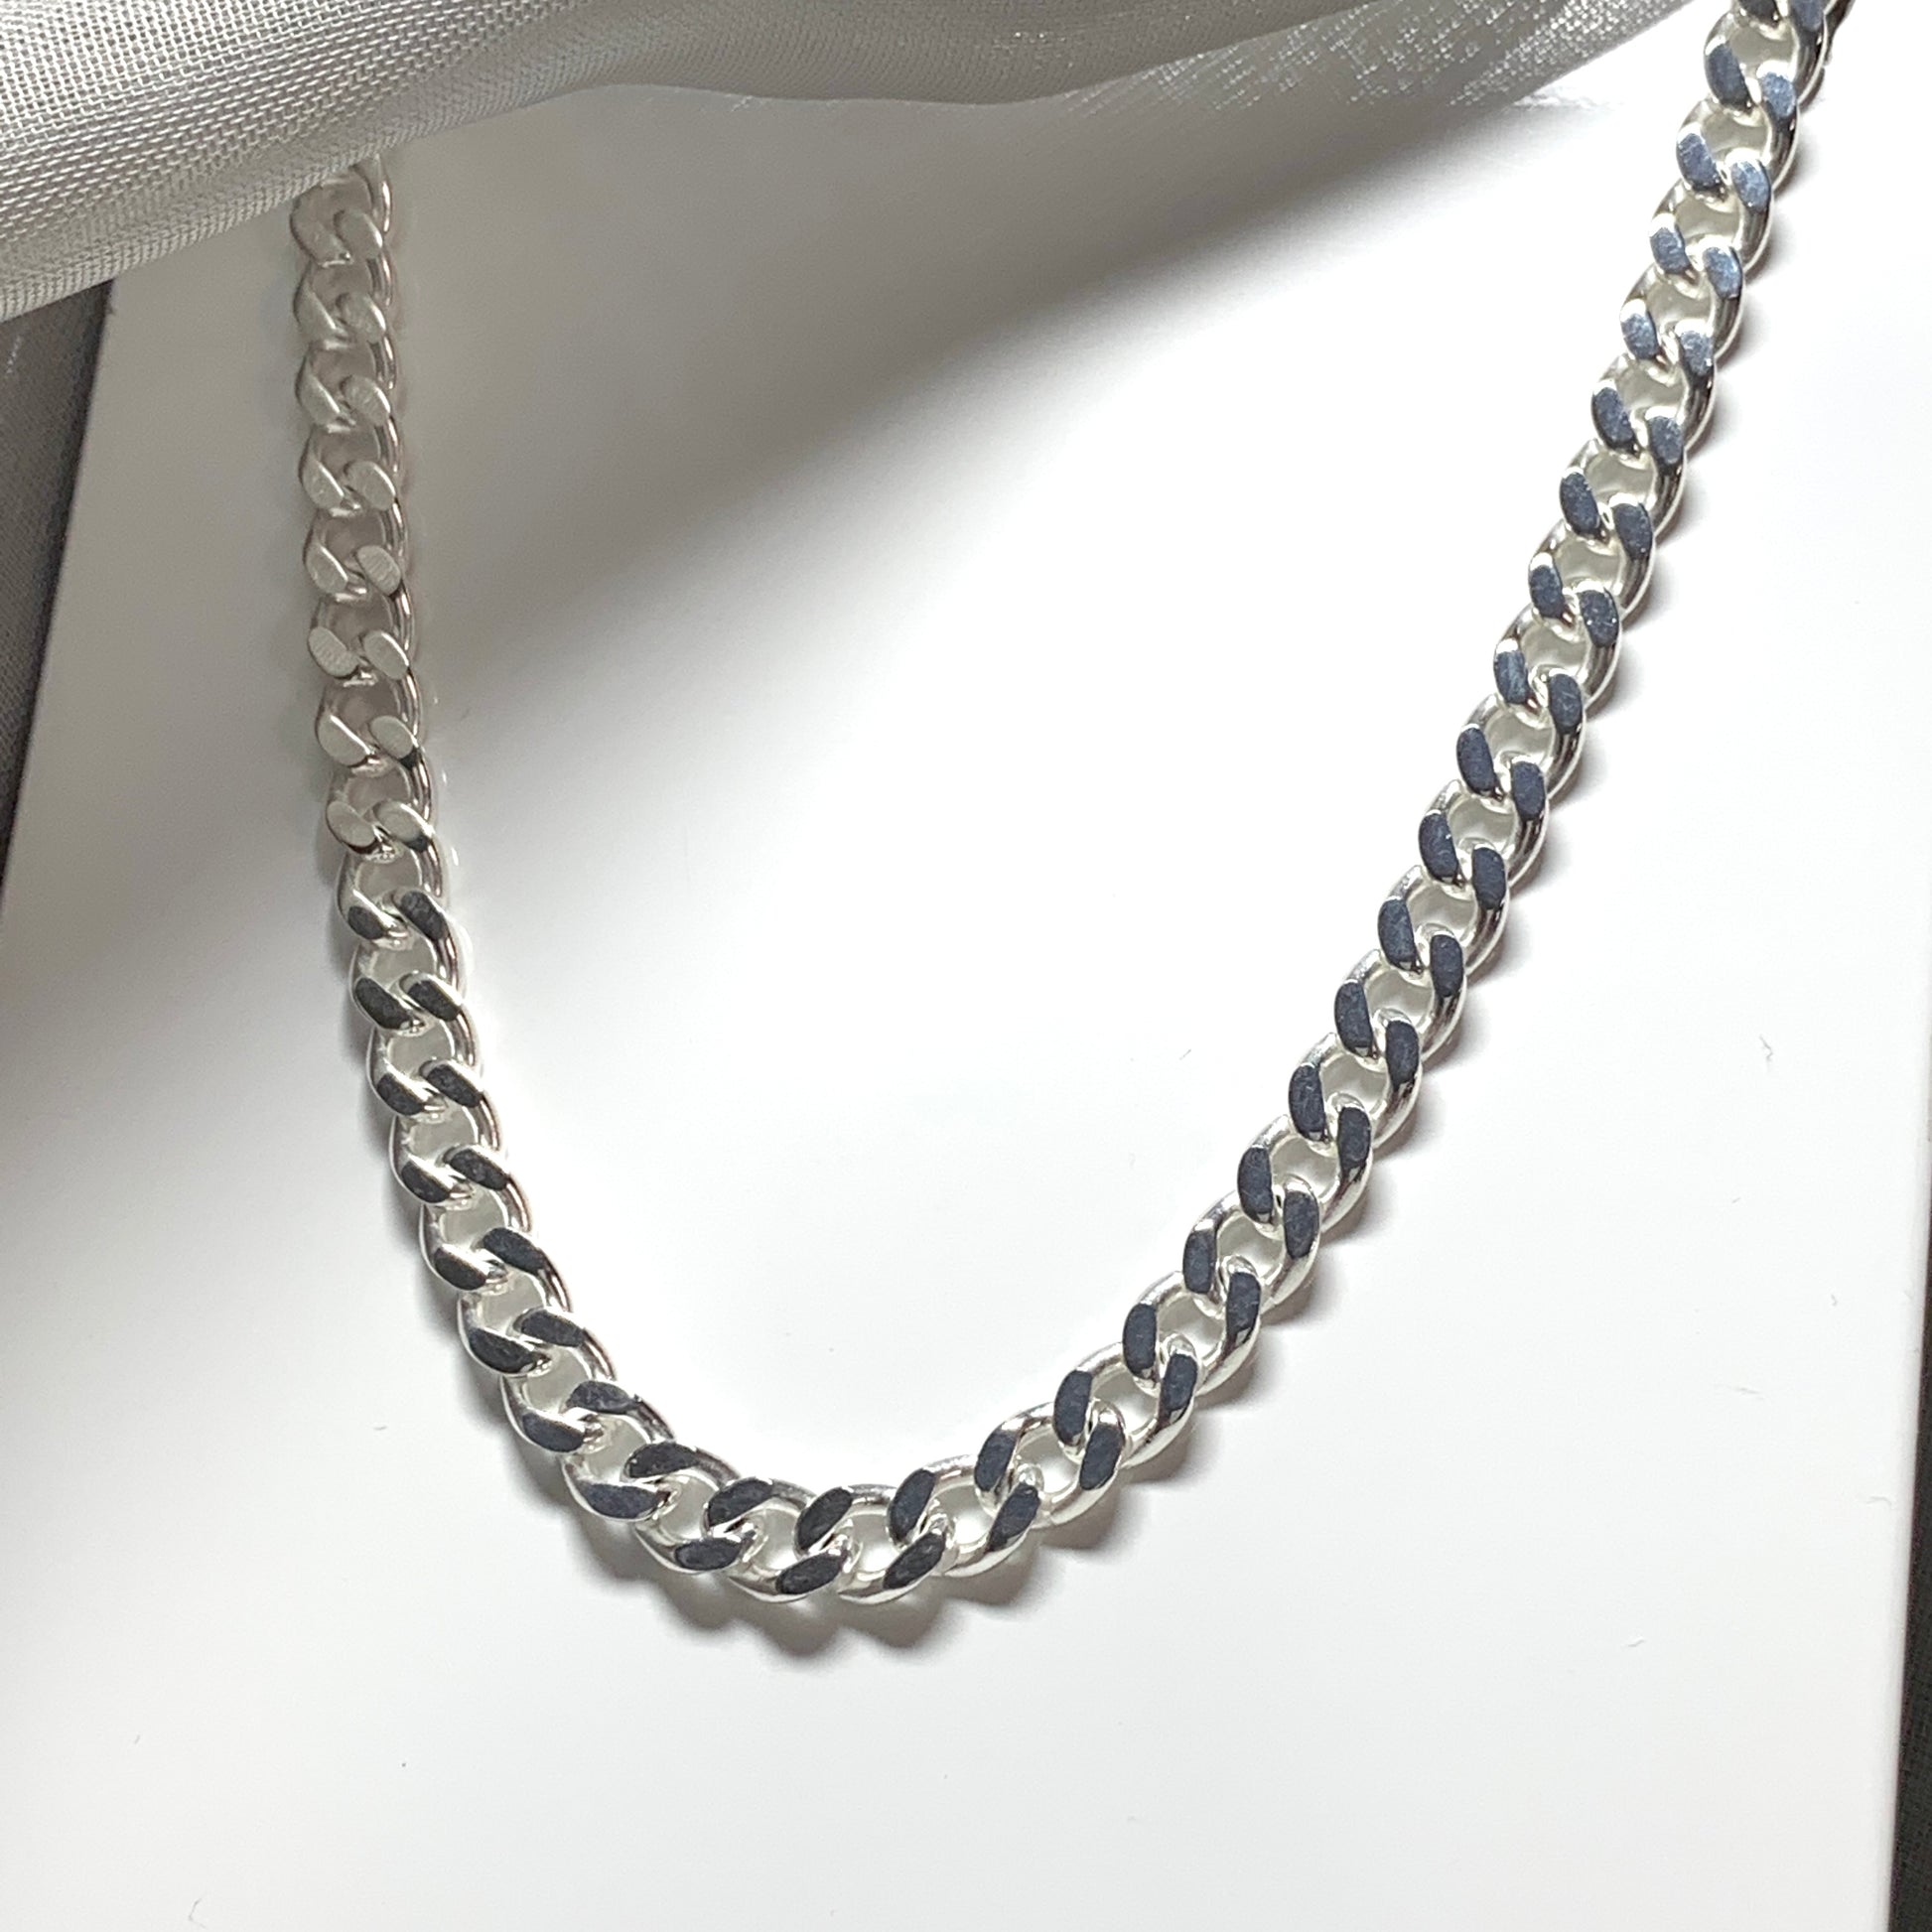 Men's necklace solid sterling silver diamond cut curb chain